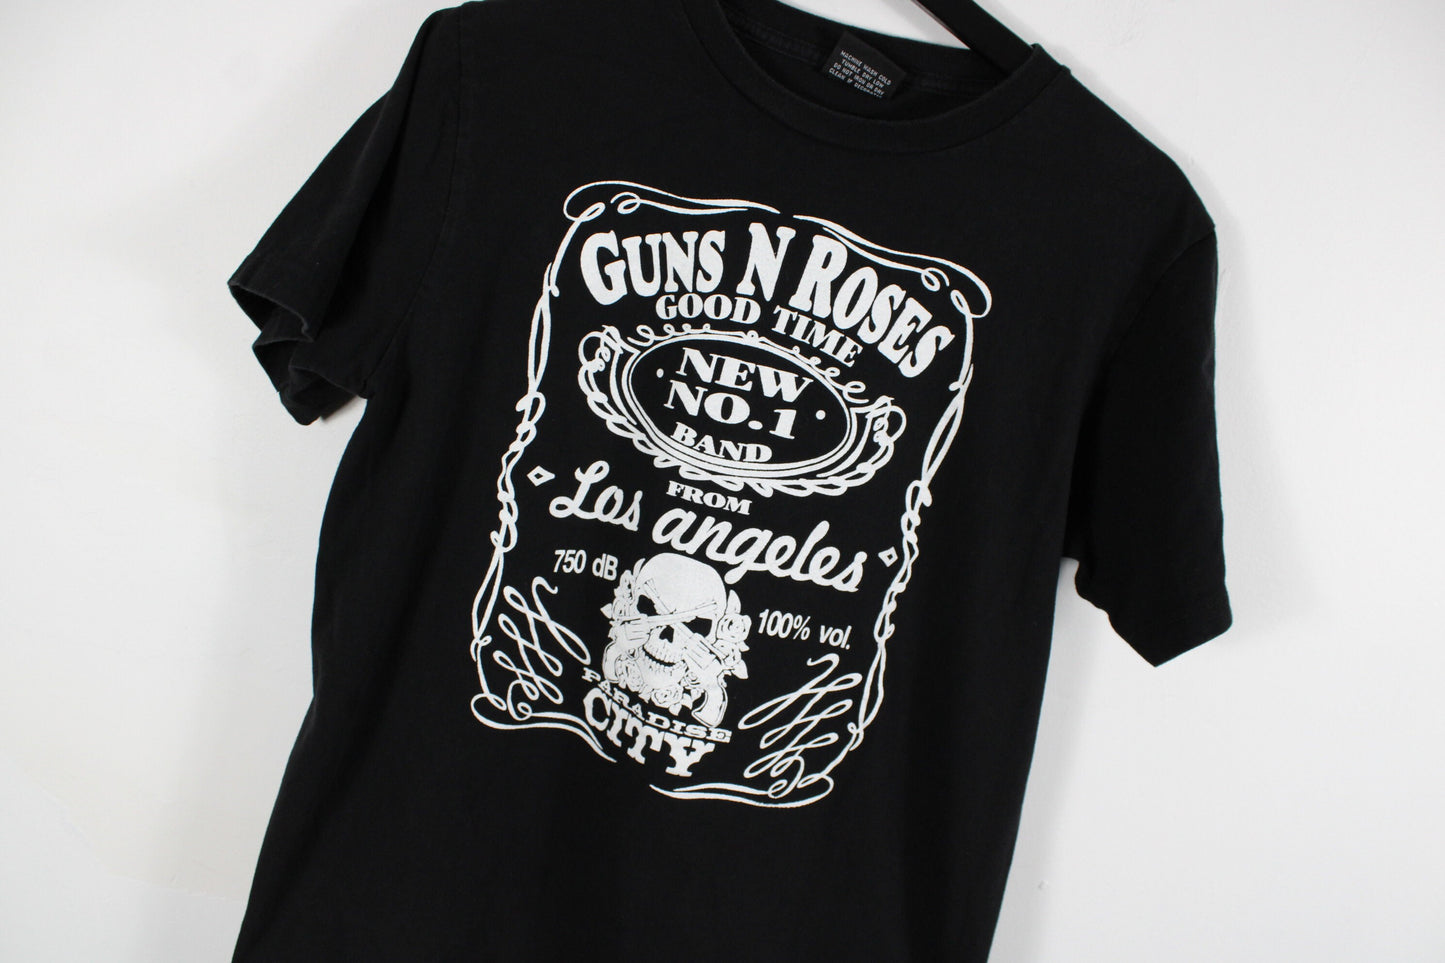 Guns-N-Roses Band T-Shirt / Vintage Rock-and-Roll Music Album / Tour Graphic Tee / 90s-2000s Clothing